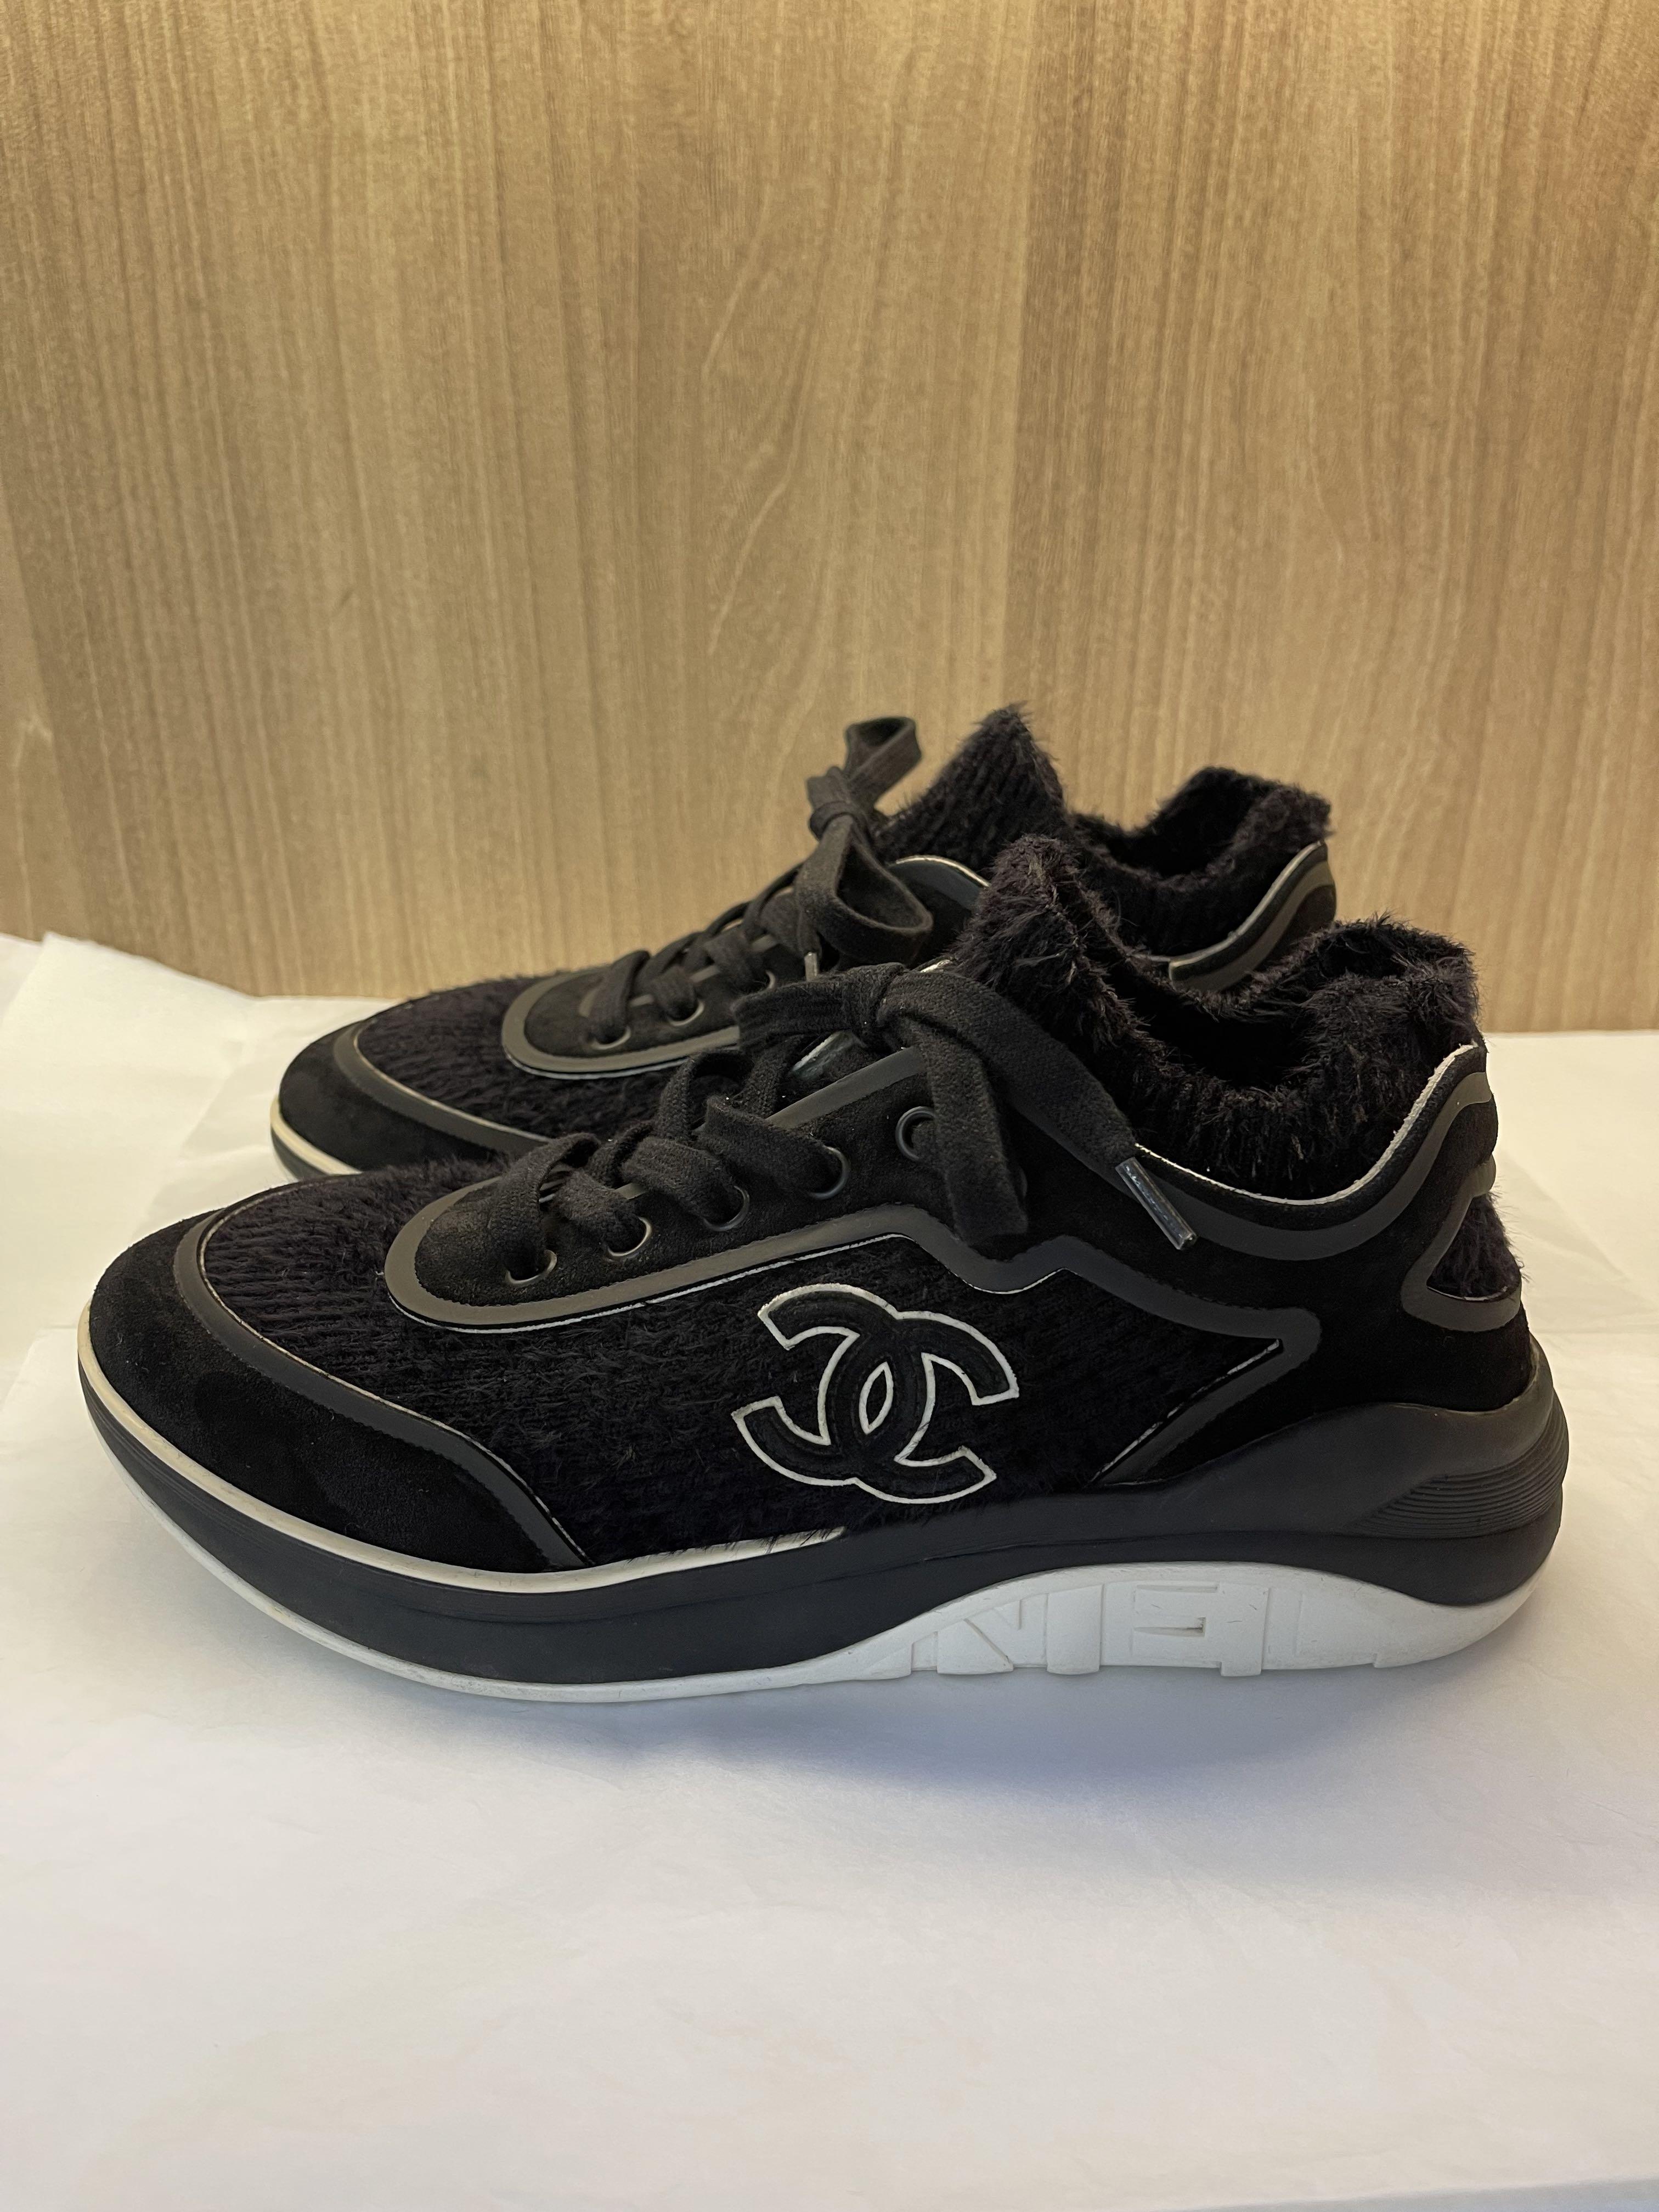 Chanel Suede Calfskin CC Logo Sneakers Size 6